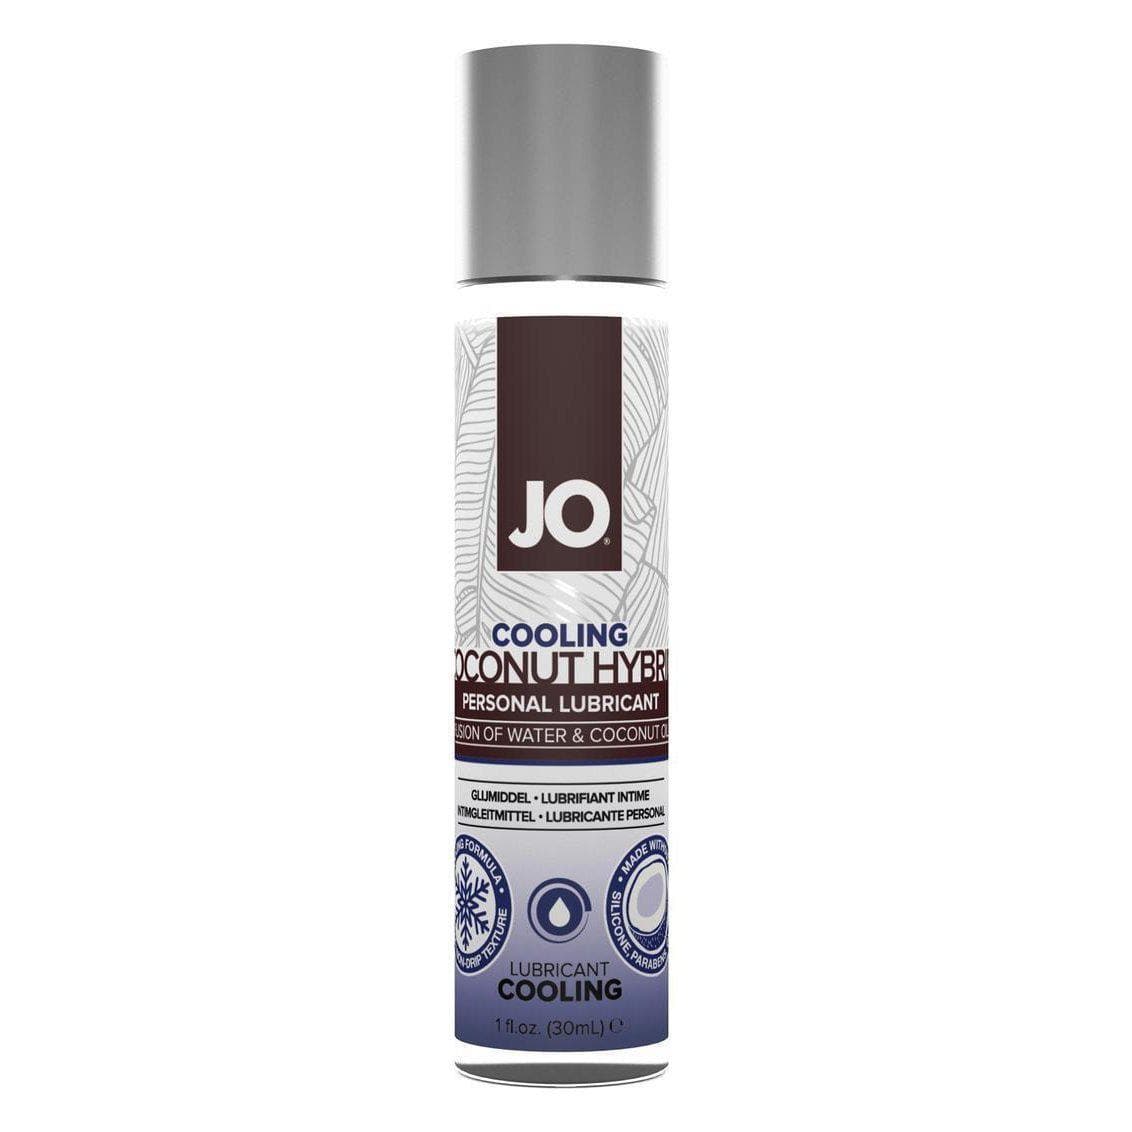 JO Silicone Free Hybrid Personal Cooling Original Lubricant Water And Coconut Oil - Romantic Blessings